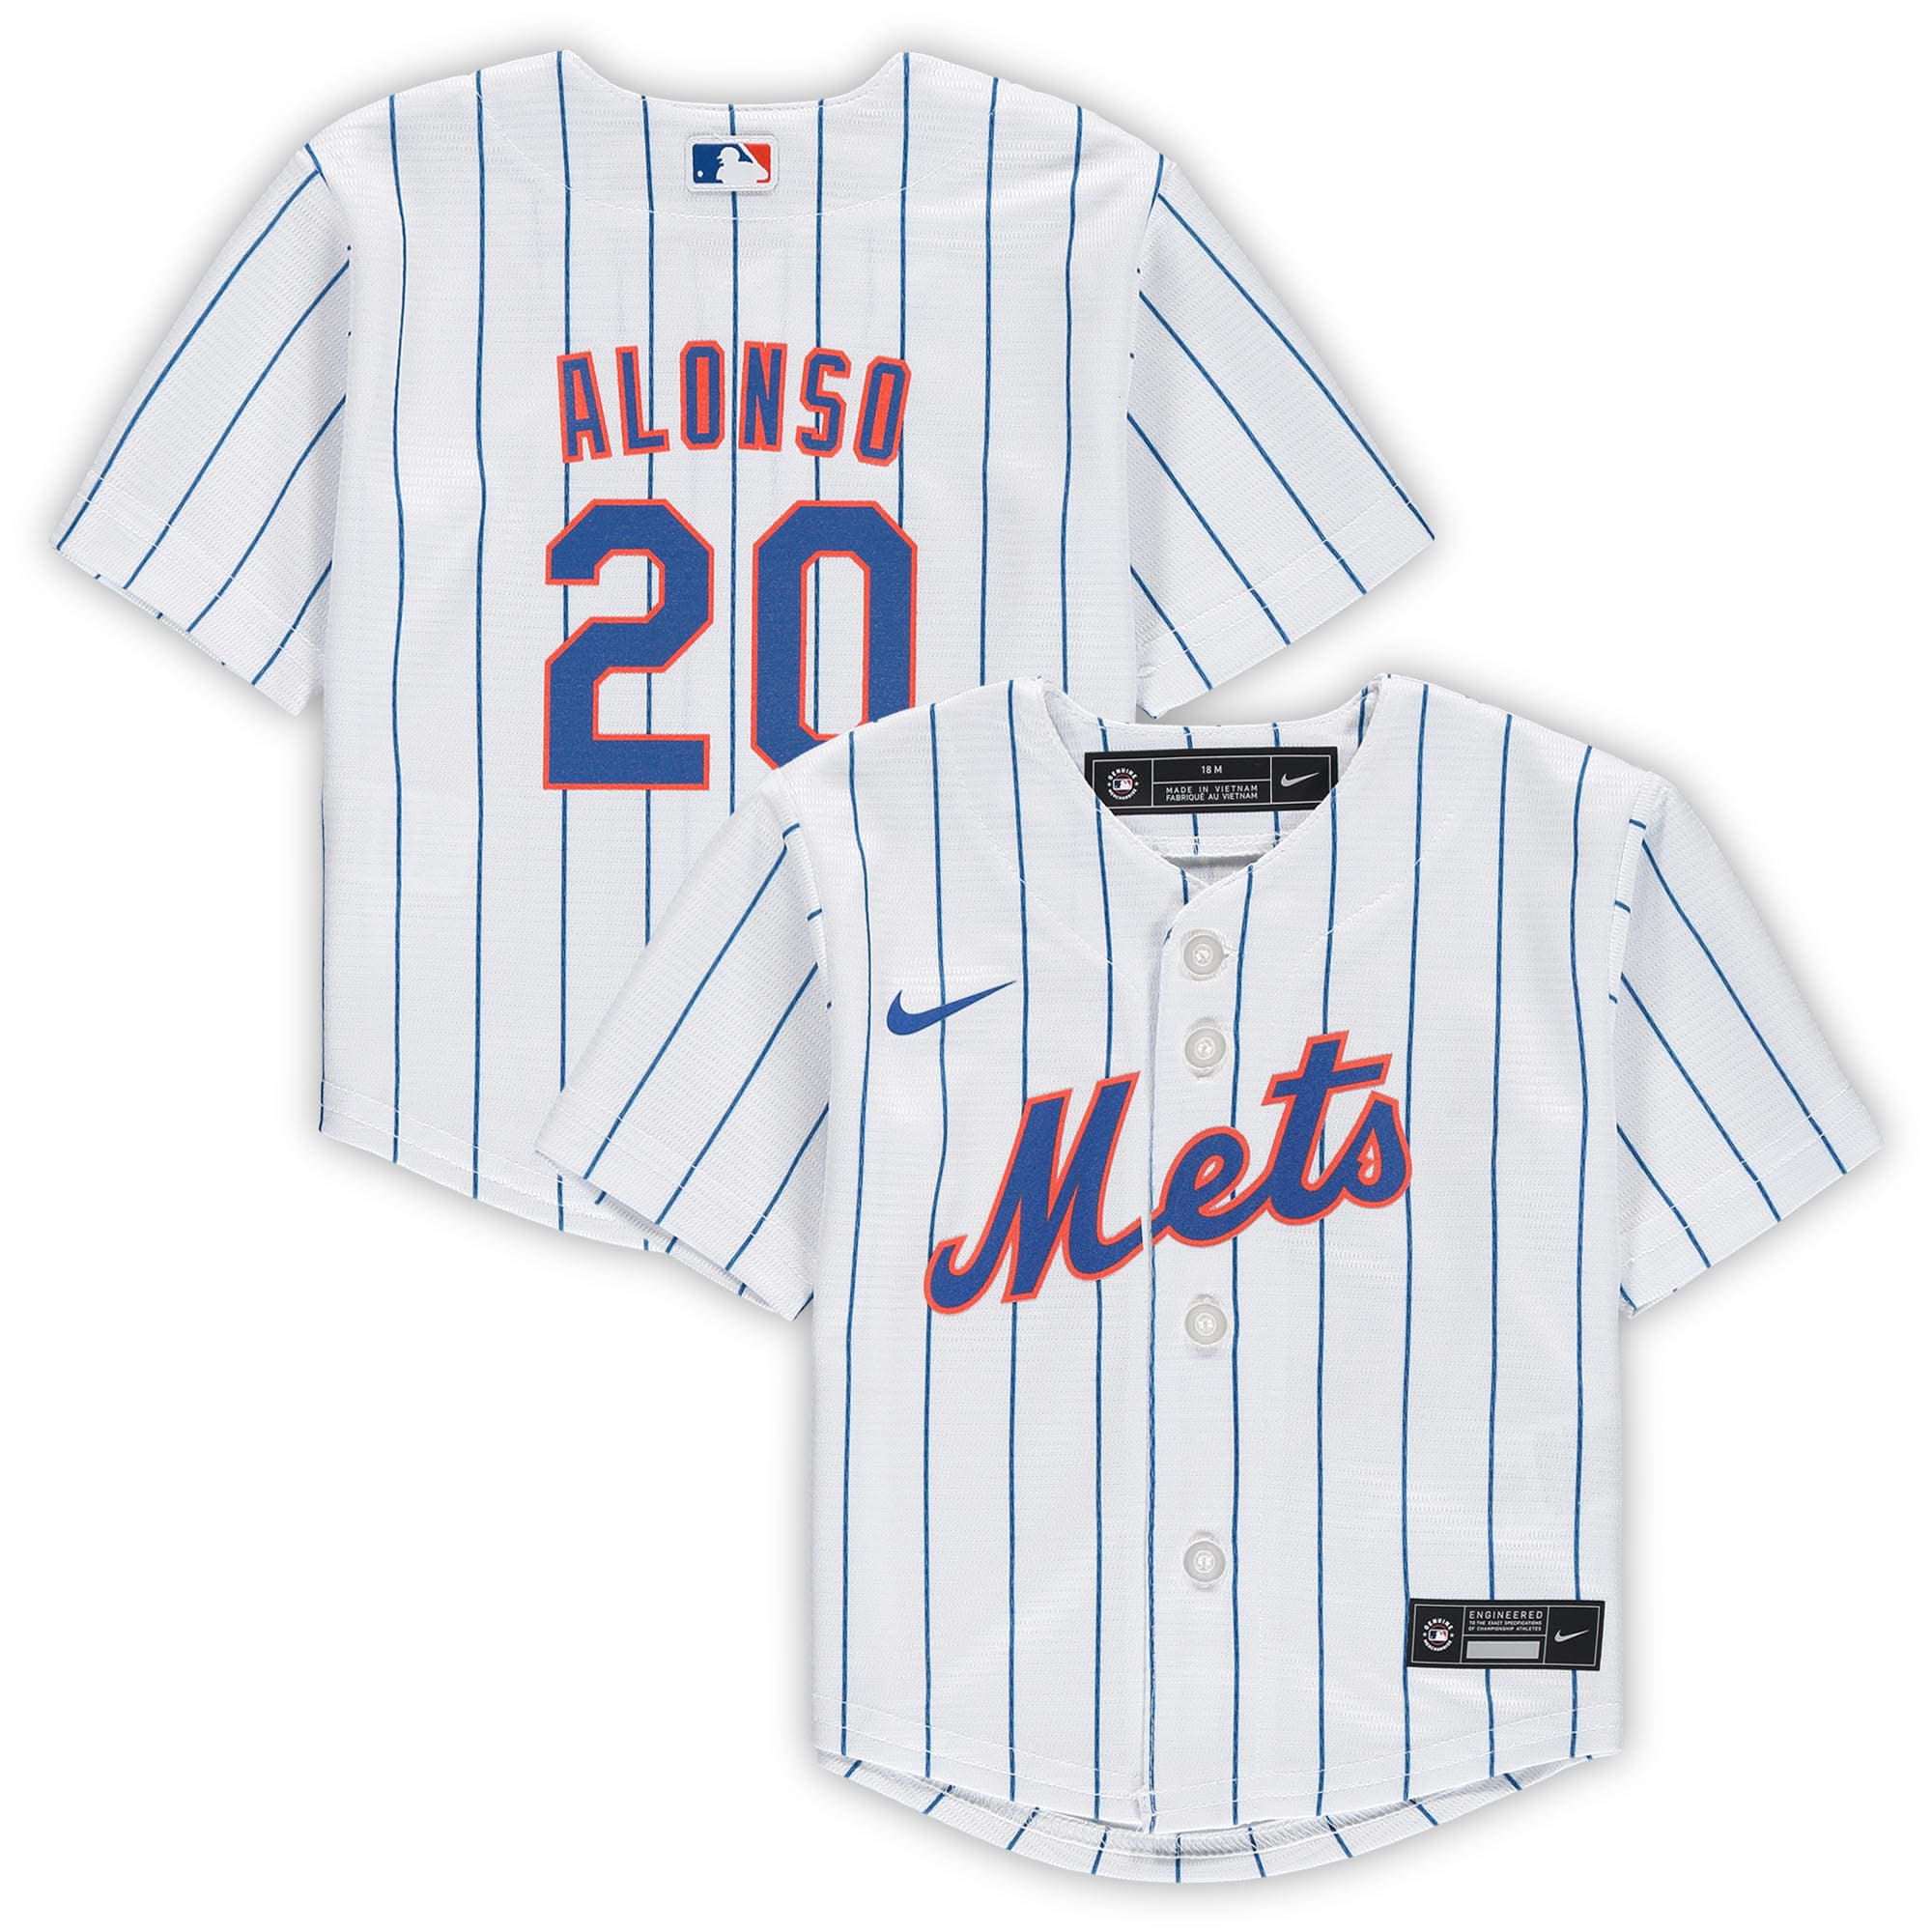 alonso jersey mets